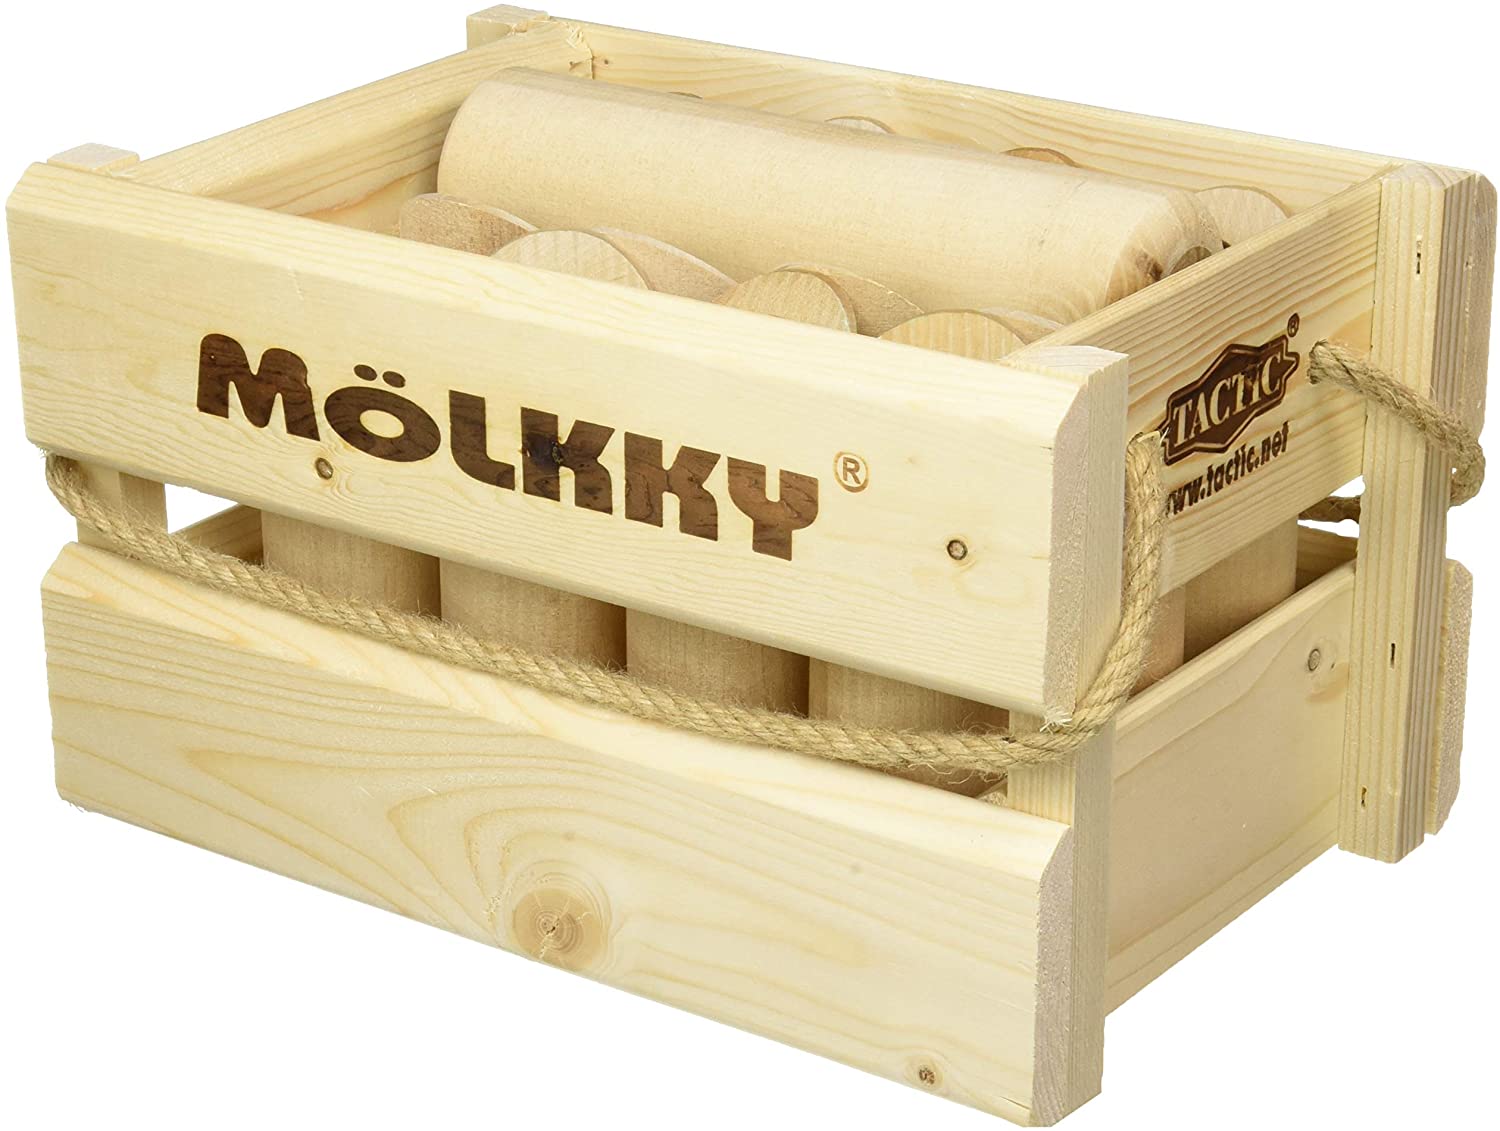 Molkky In A Wooden Crate